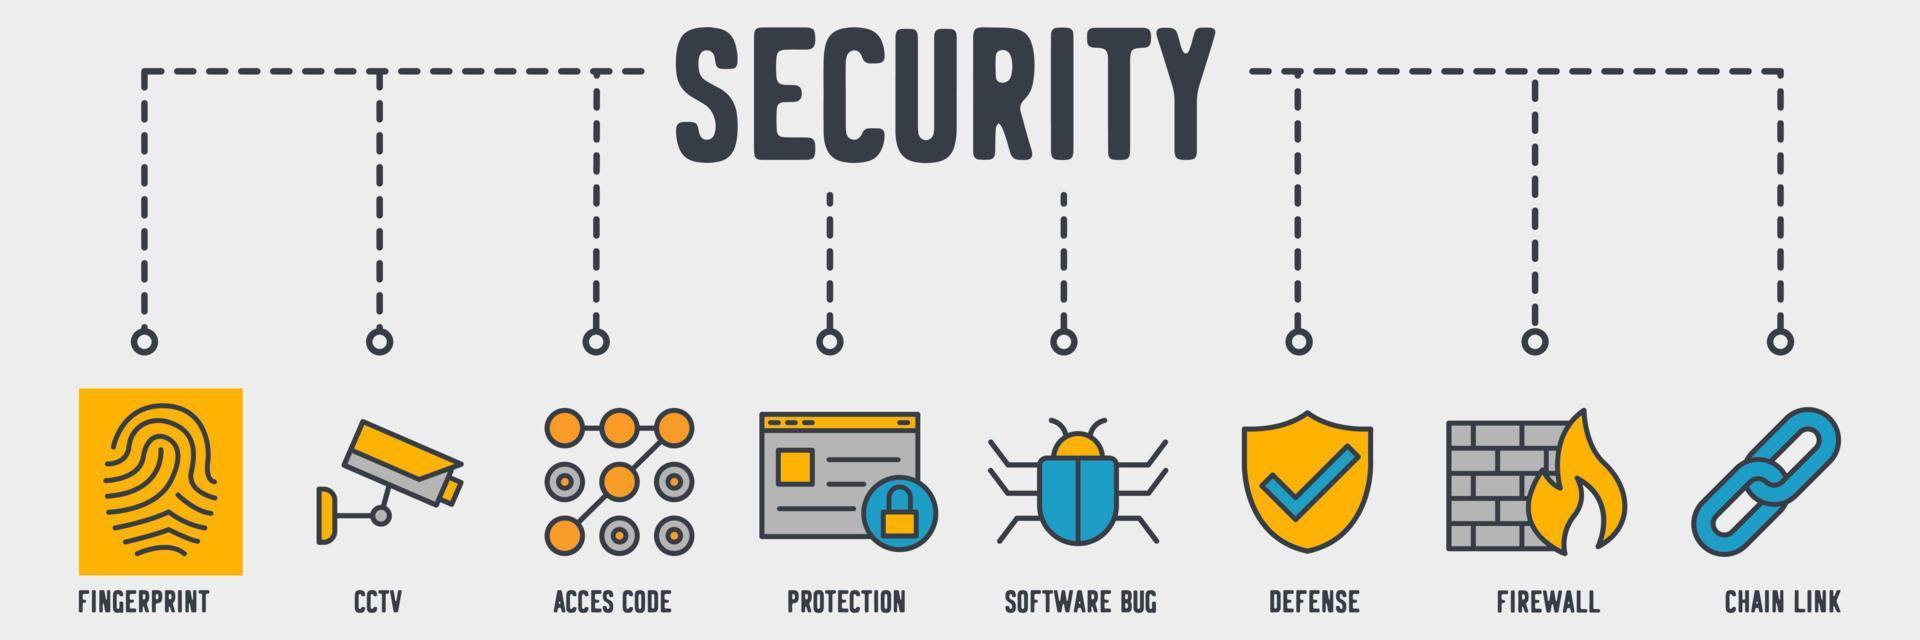 Security banner web icon. fingerprint, cctv, access code, protection, software bug, defense, firewall, chain link vector illustration concept.